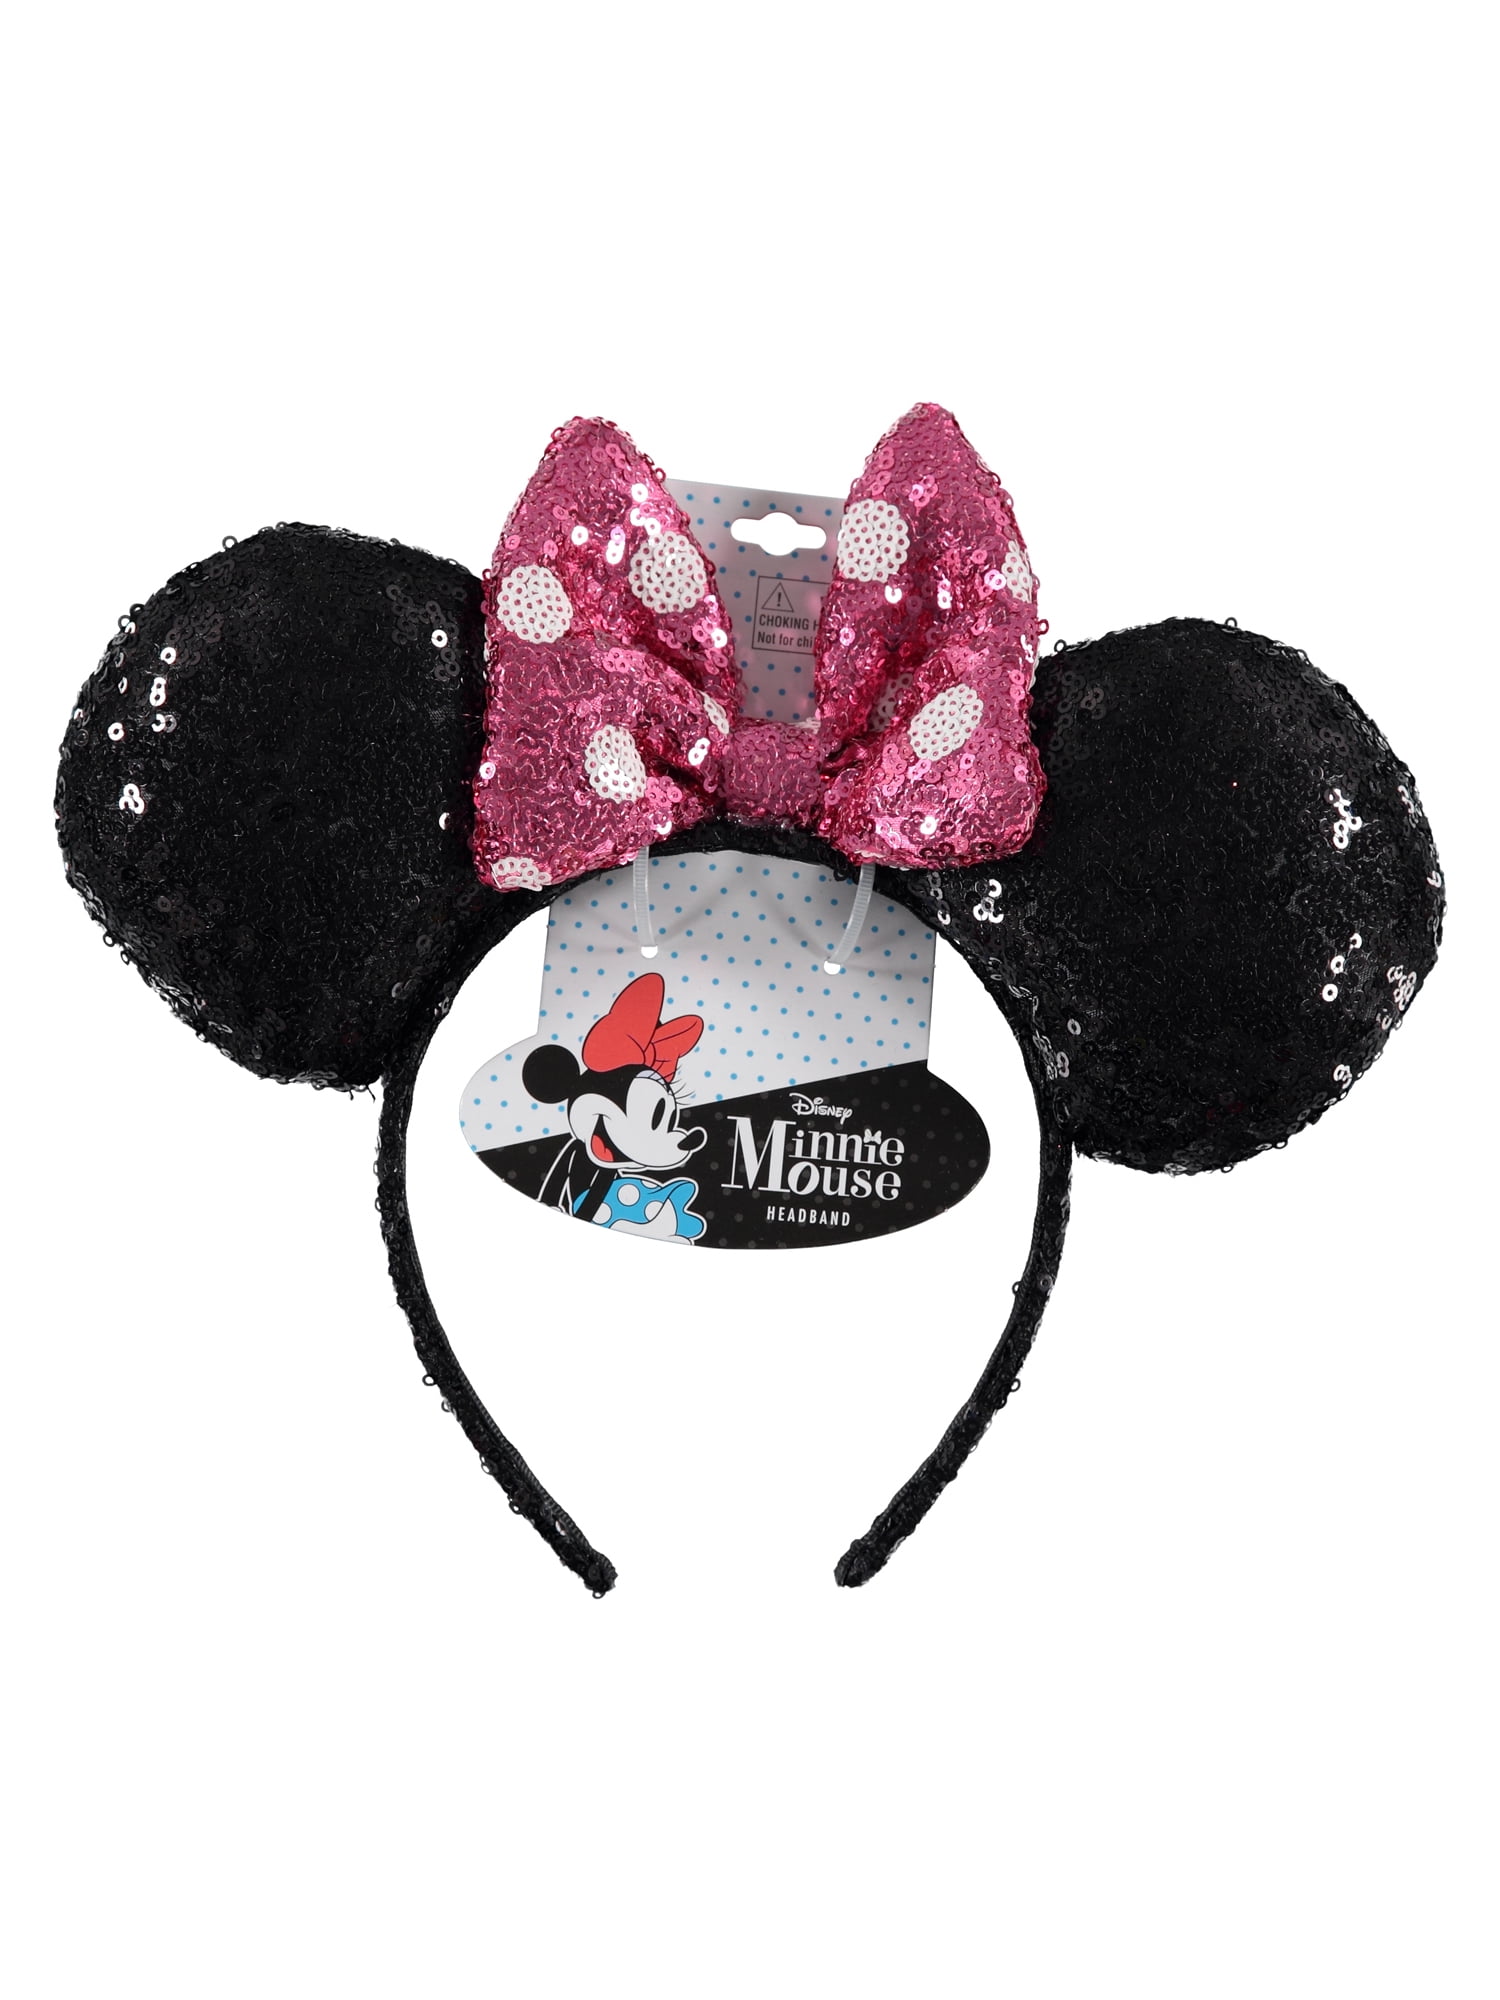 NEW Disney Parks Dark Blue and Pink Dots Bow Minnie Mouse Ears Headband Hat 